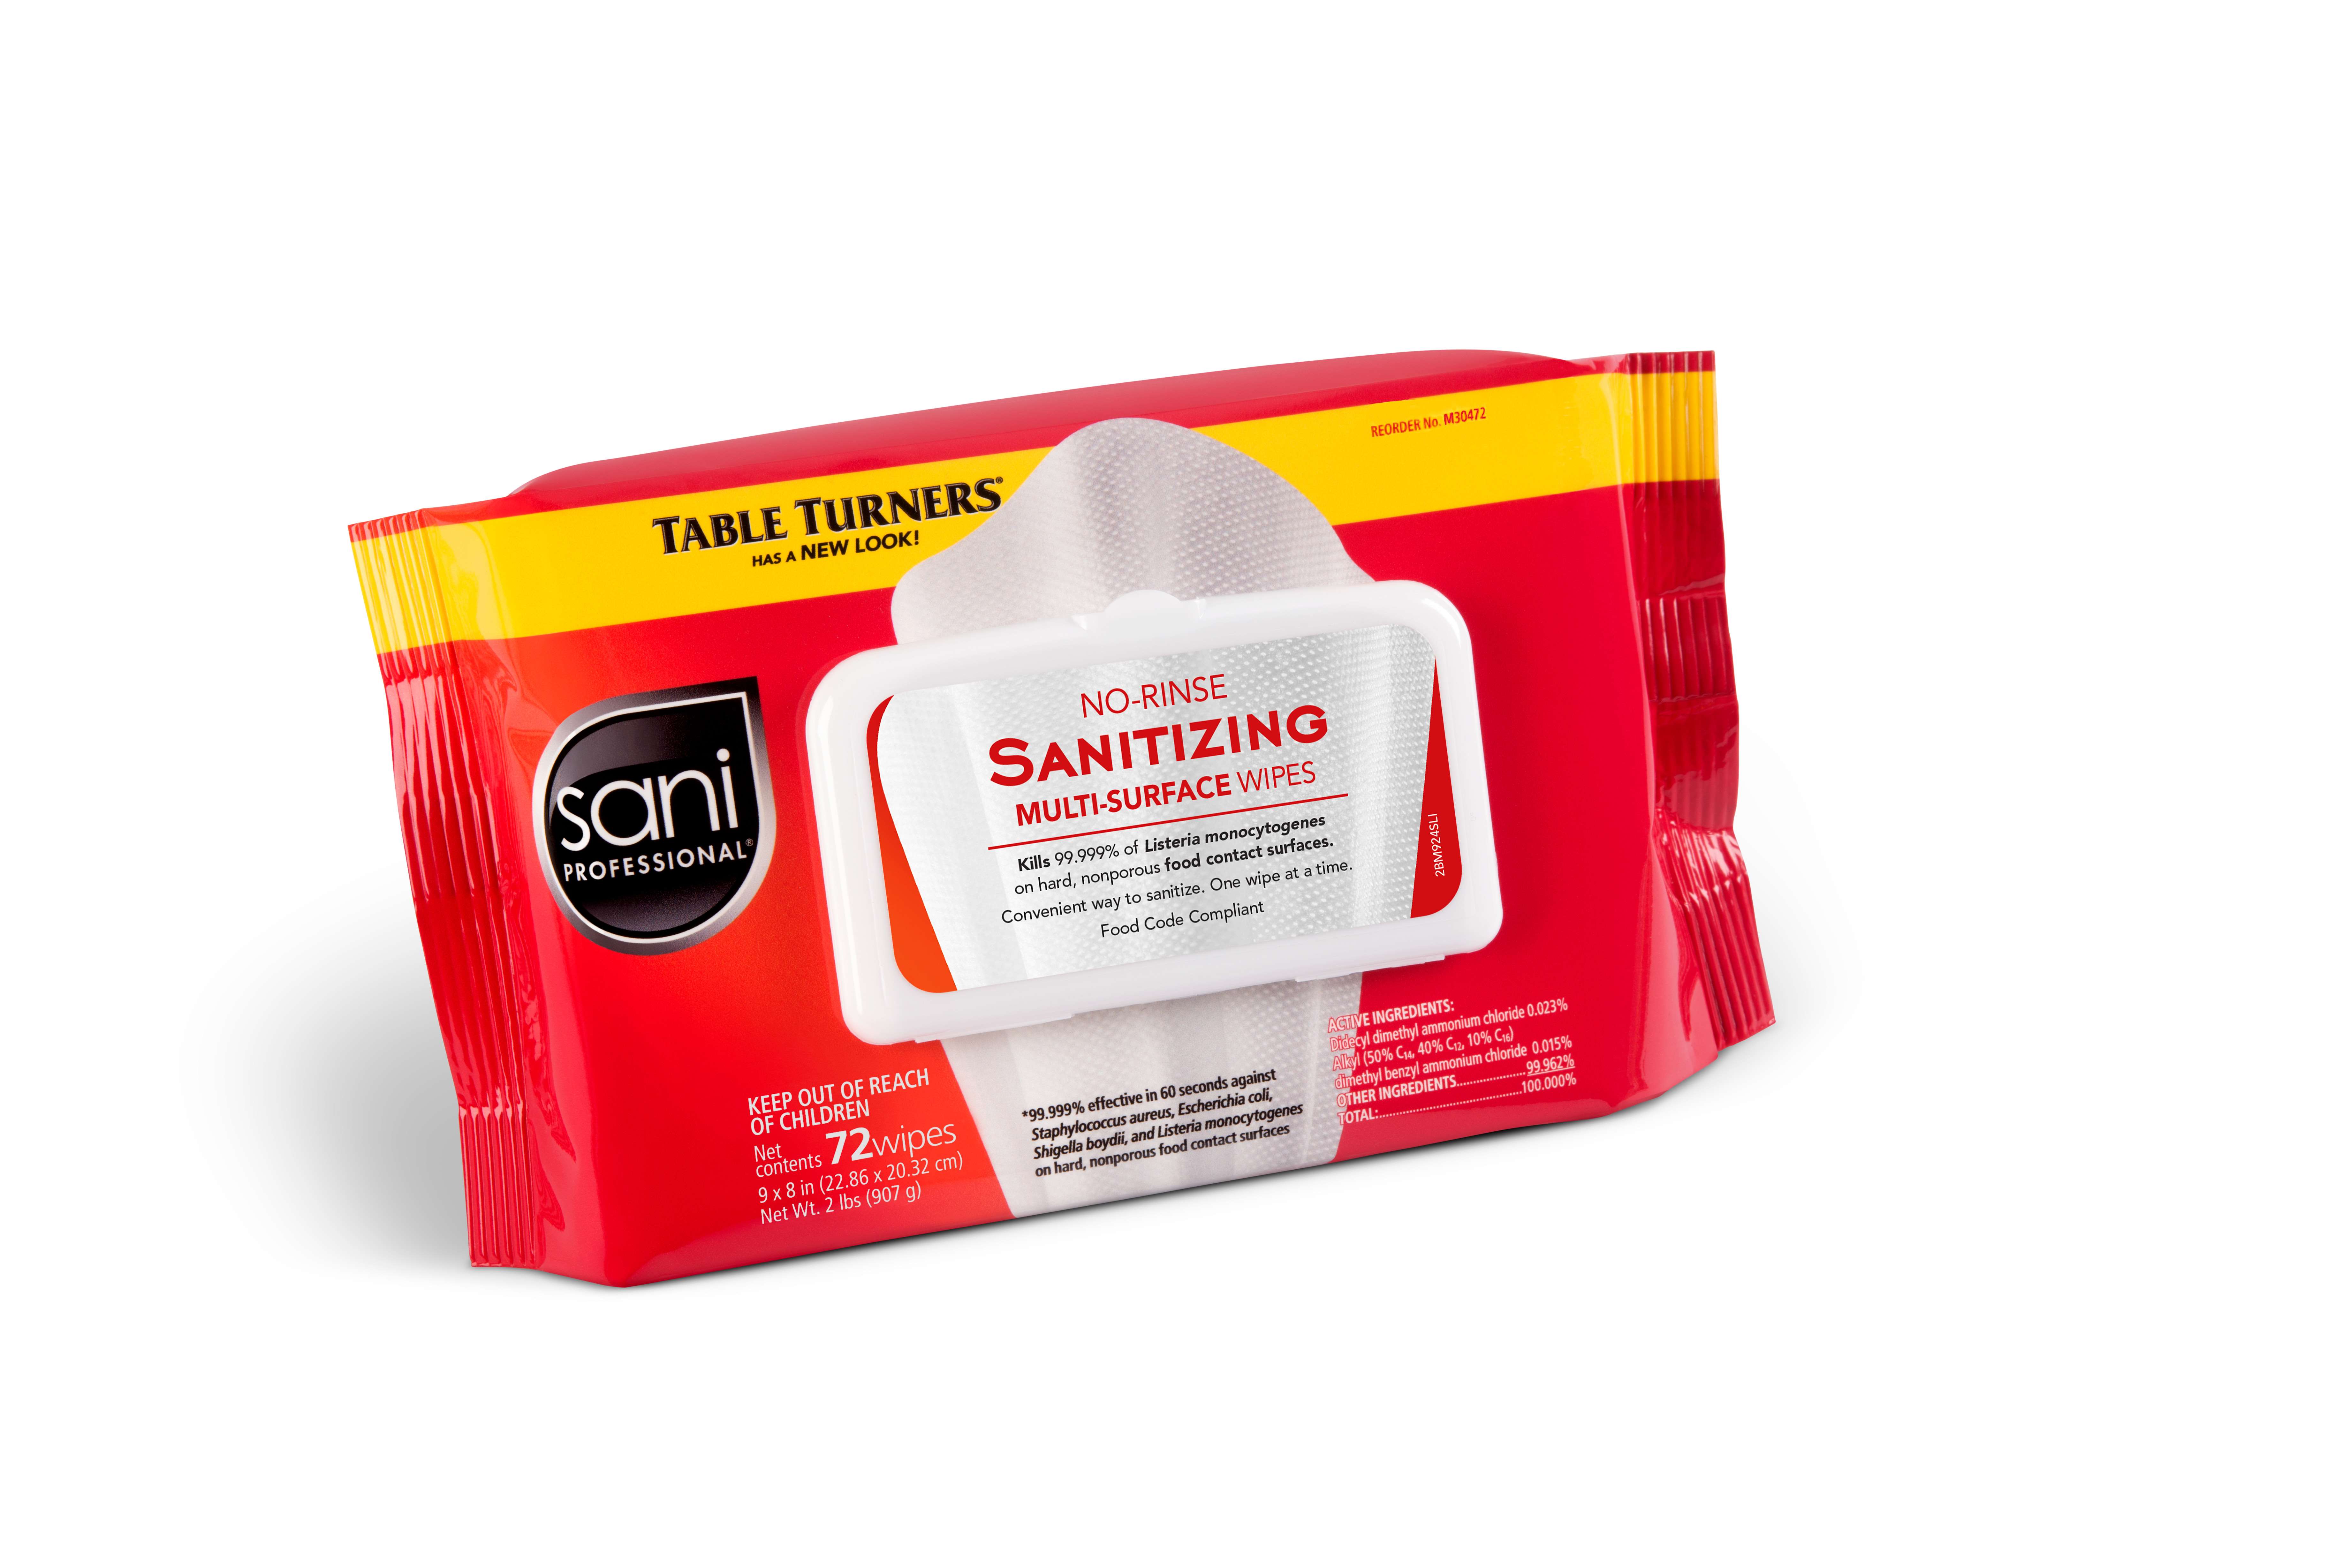 TABLE TURNERS NO-RINSE SANITIZING WIPES BY SANI PRO,